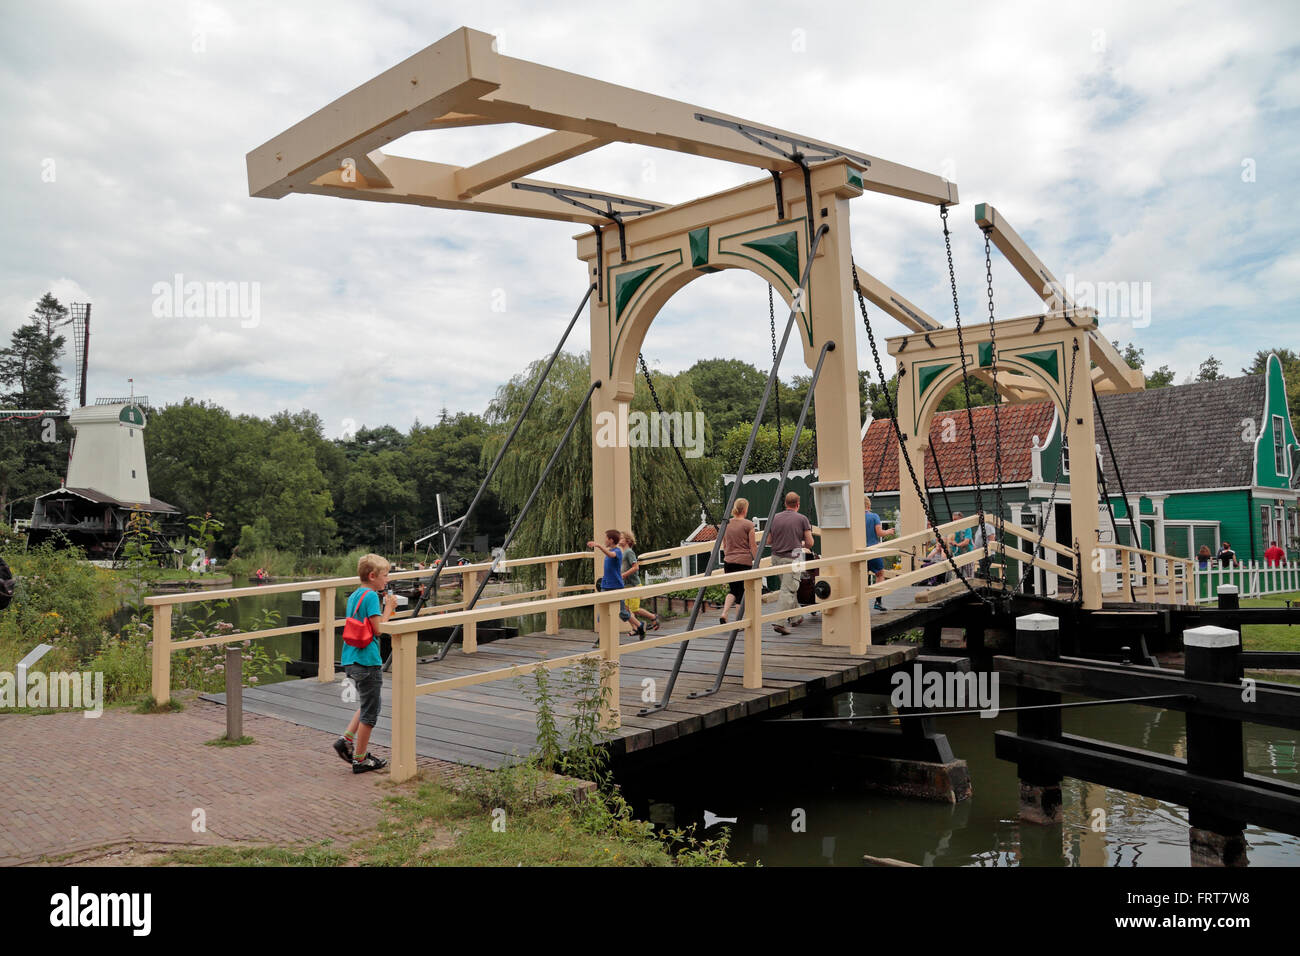 A bascule bridge in the Netherlands Open Air Museum (Nederlands Openluchtmuseum), Arnhem, Netherlands. Stock Photo